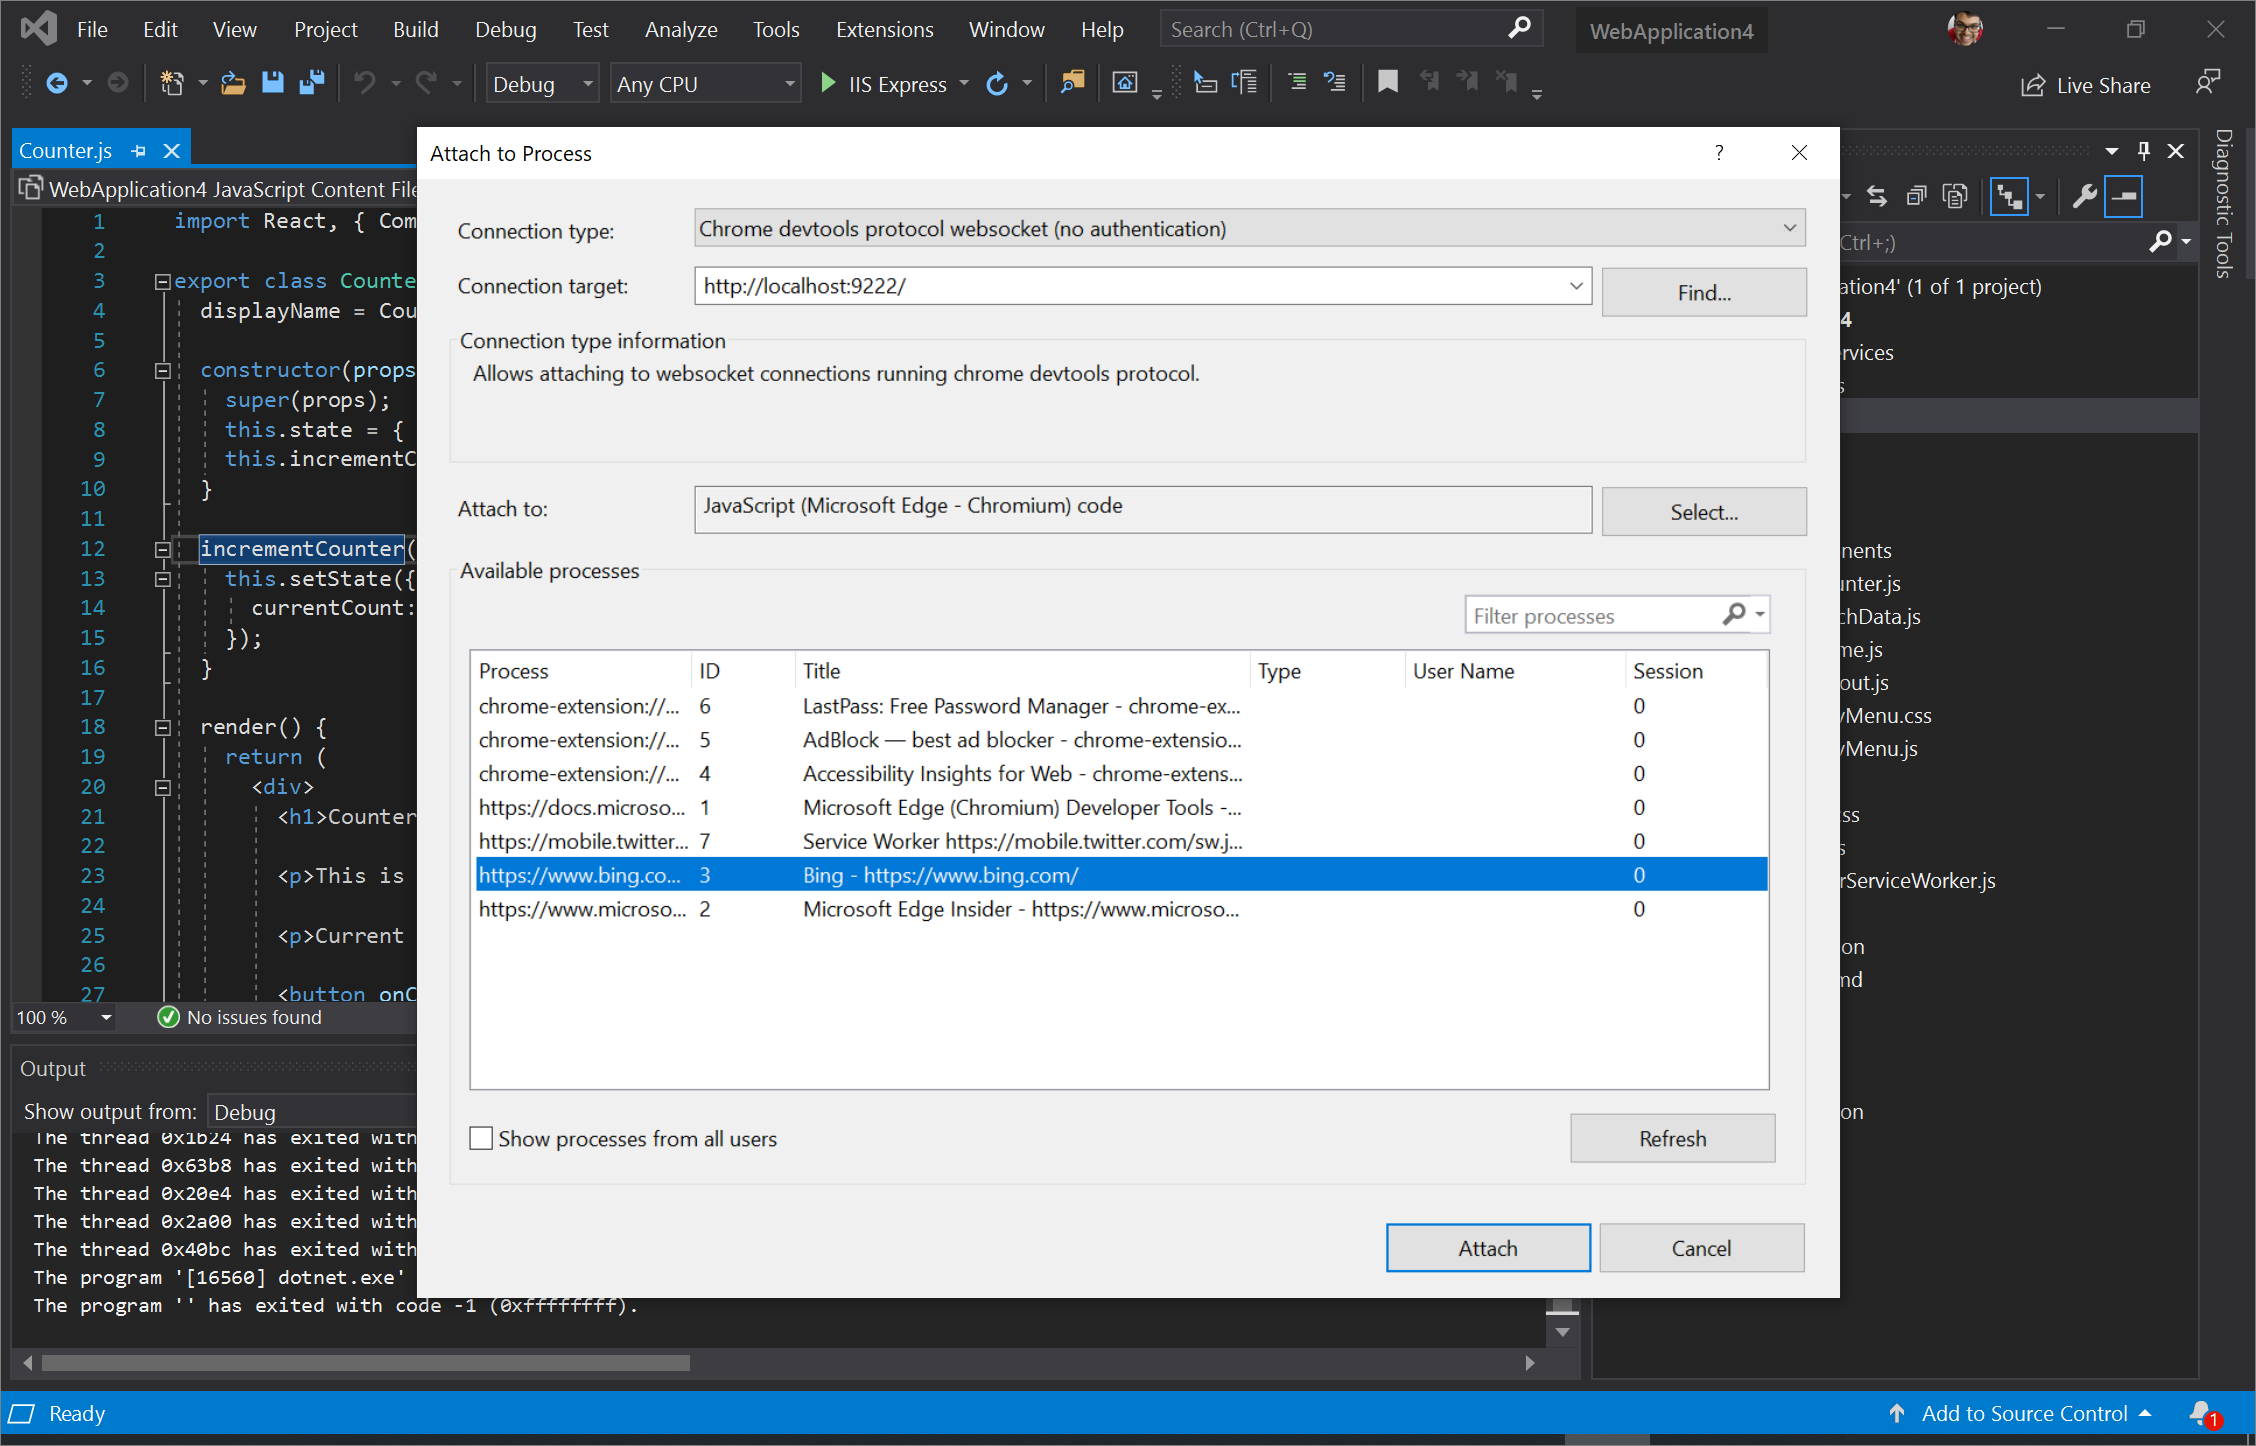 Configuring the 'Attach to Process' dialog in Visual Studio.